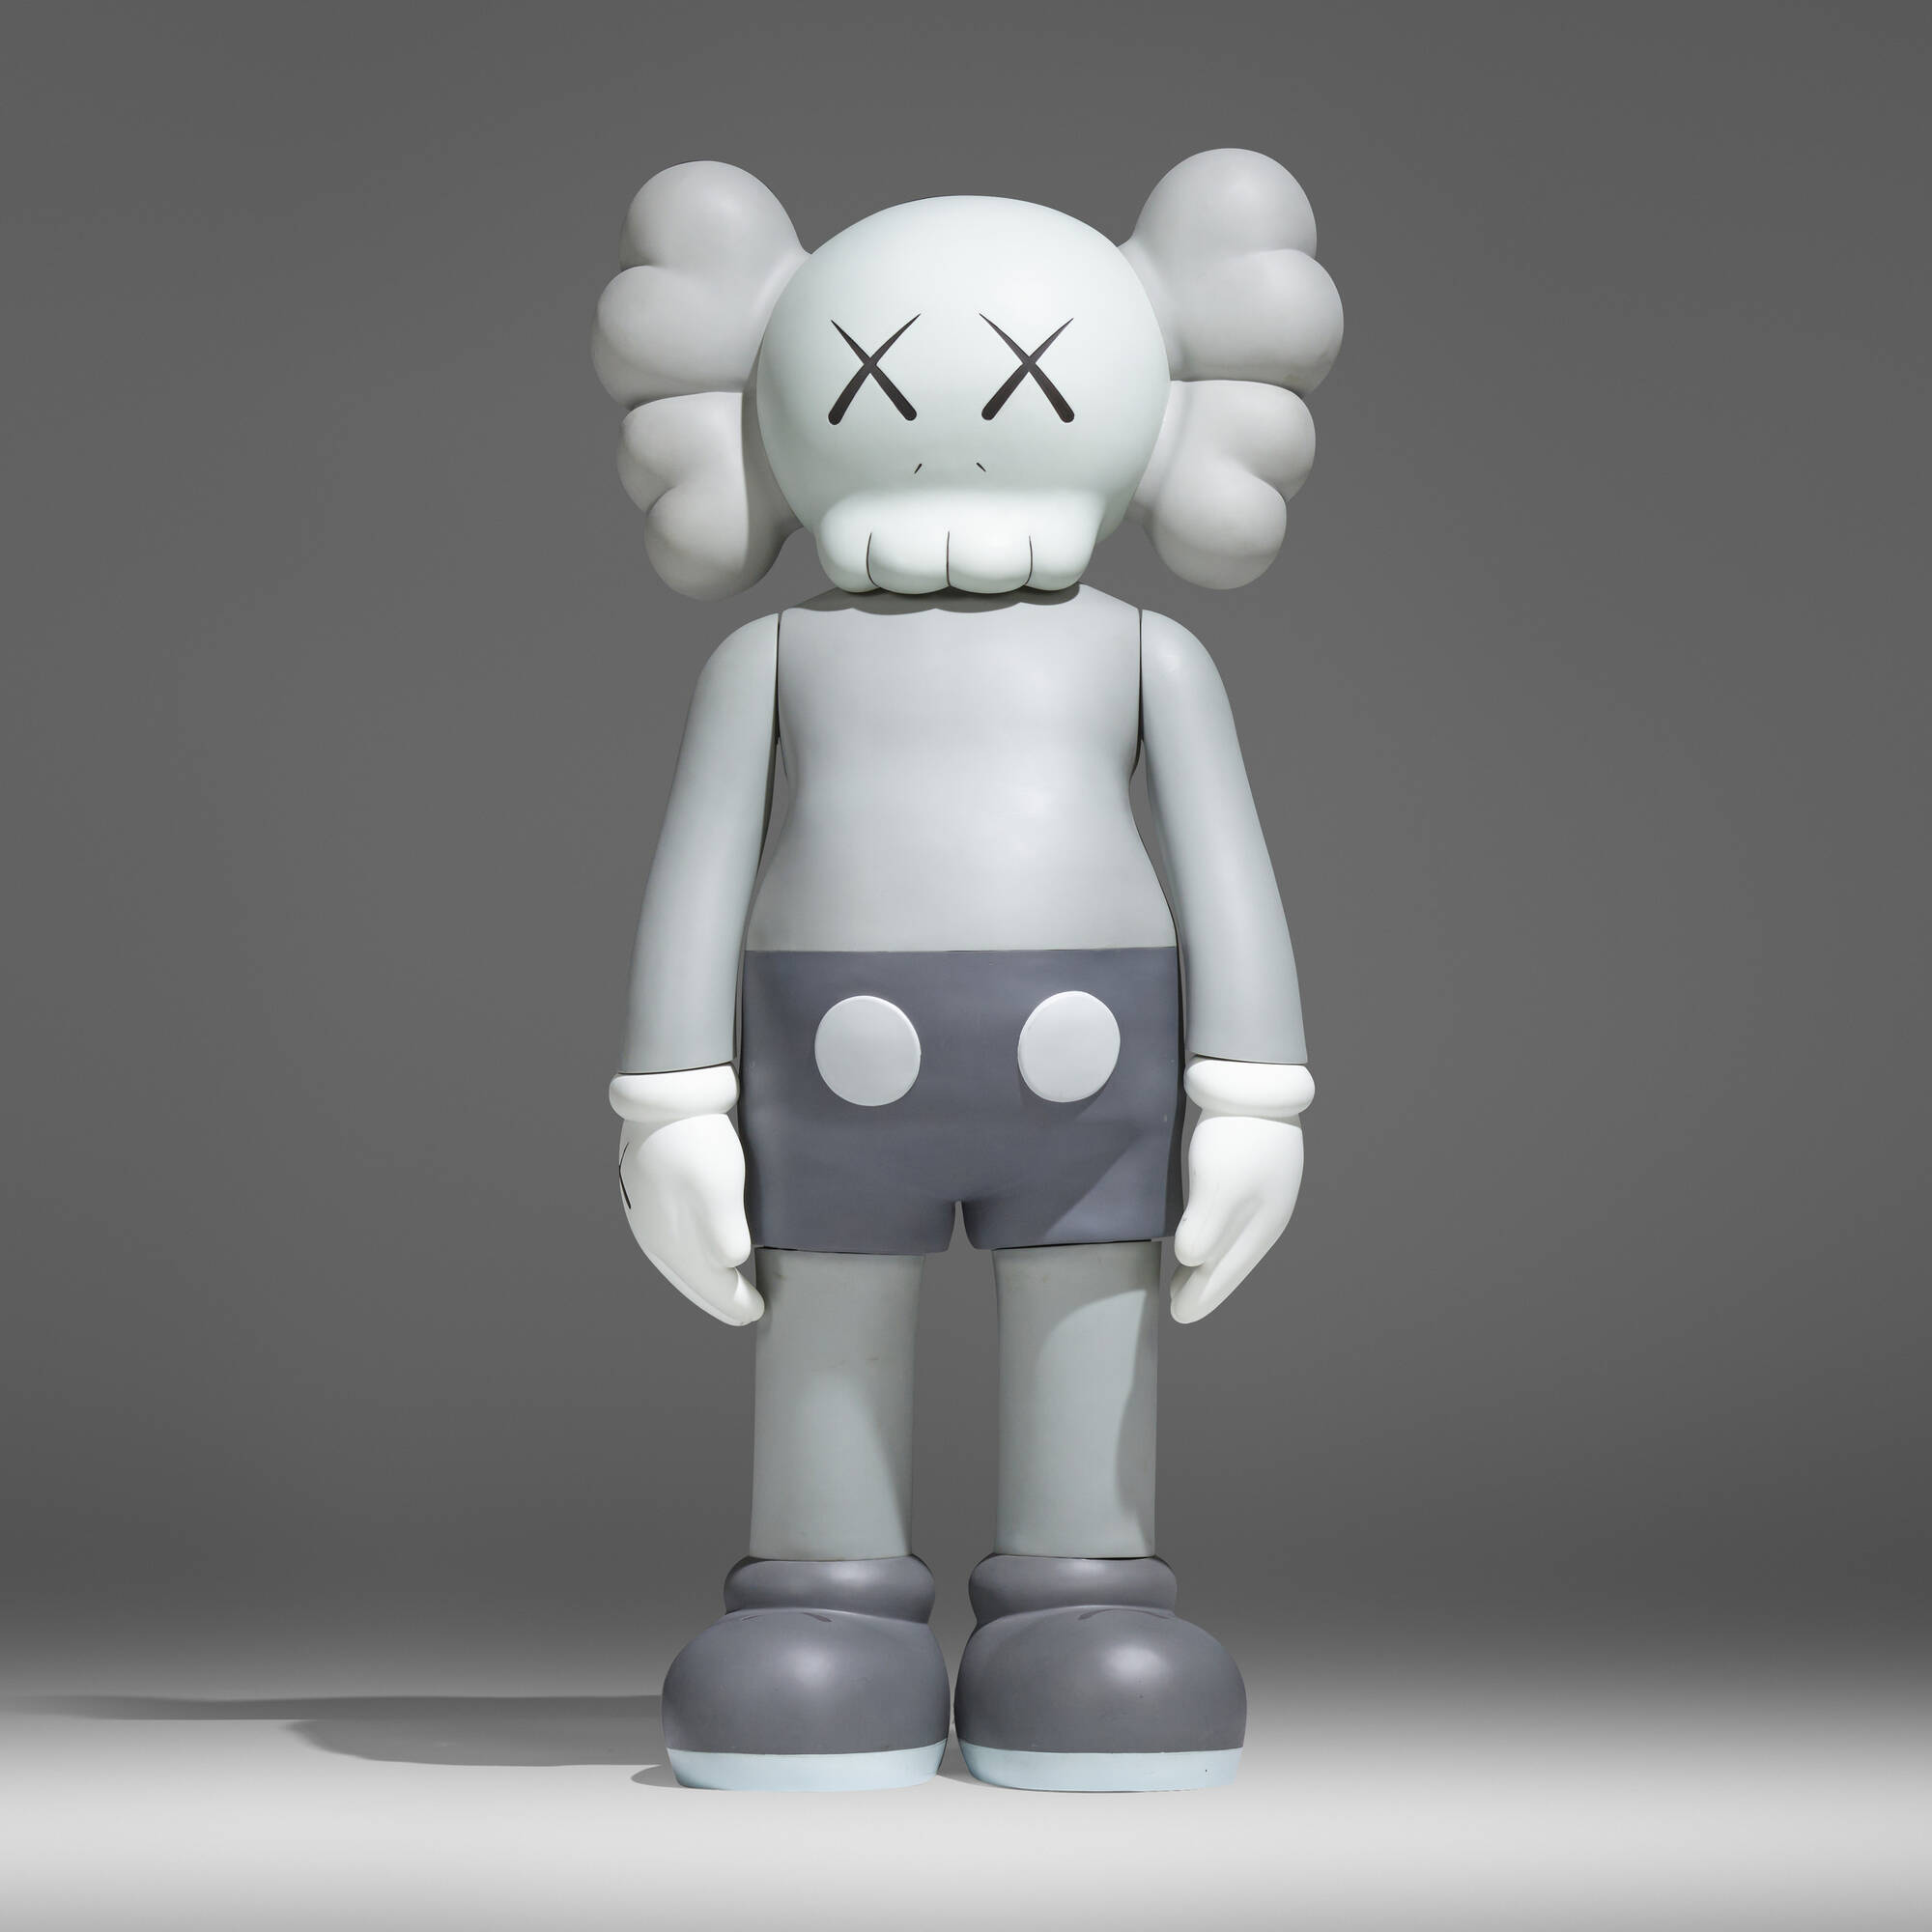 104: KAWS (BRIAN DONNELLY), Four Foot Companion (Grey) < Curated 